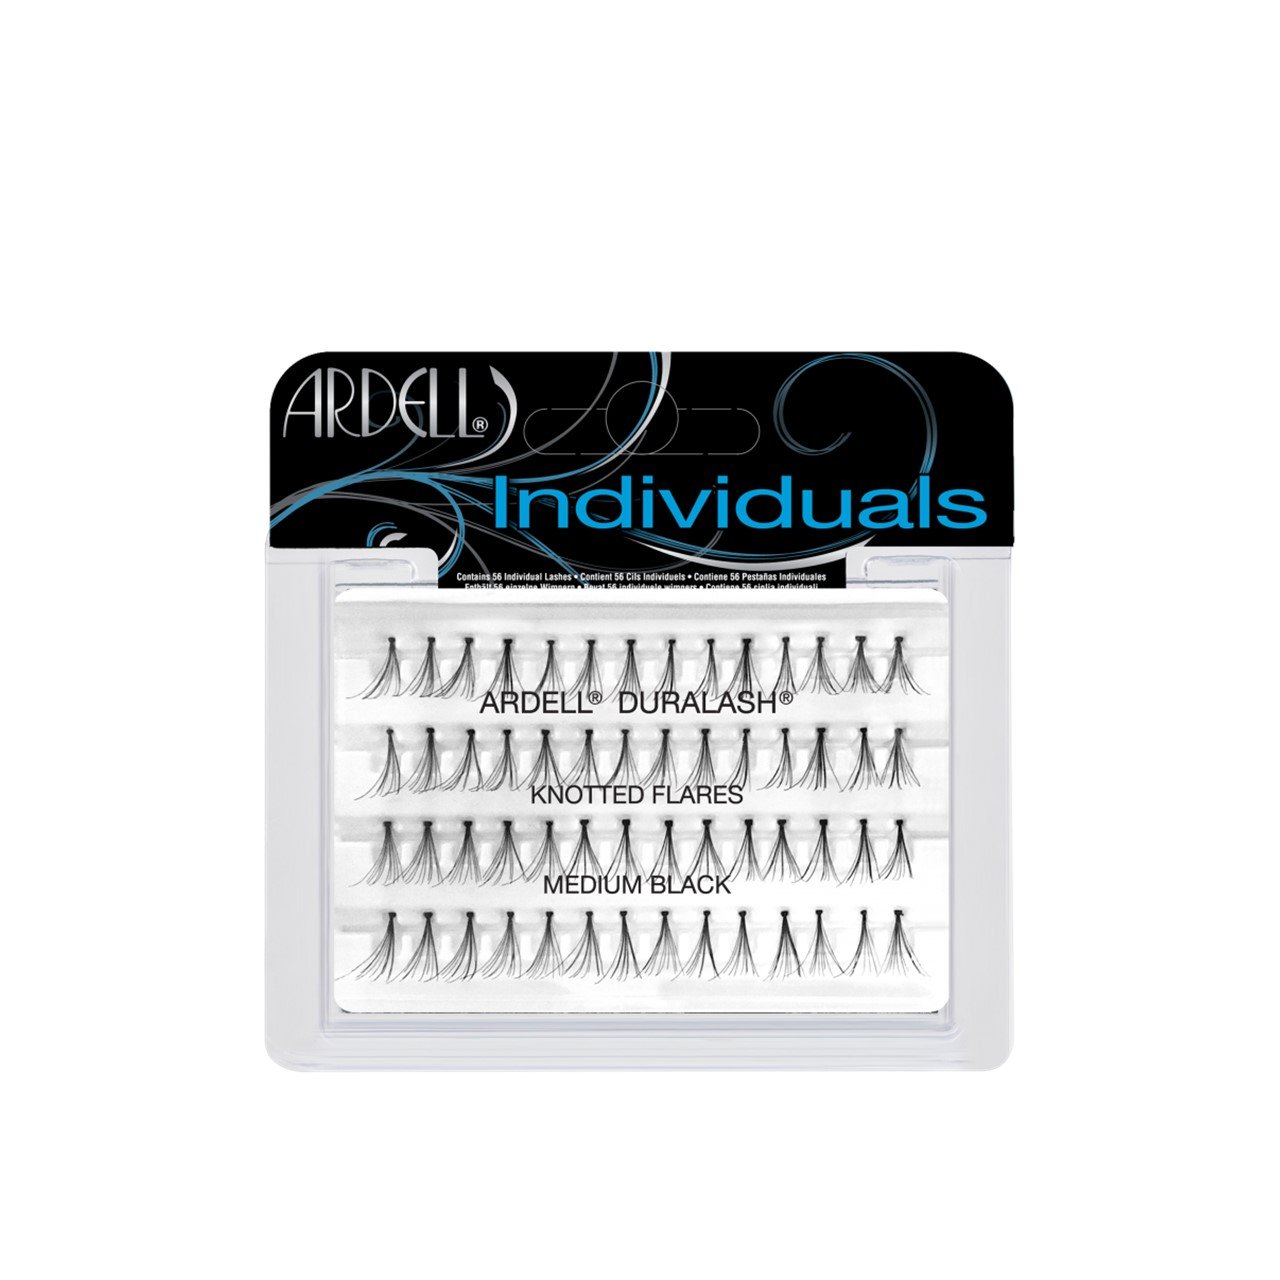 Ardell Individuals Lashes Knotted Flares Medium Black x56